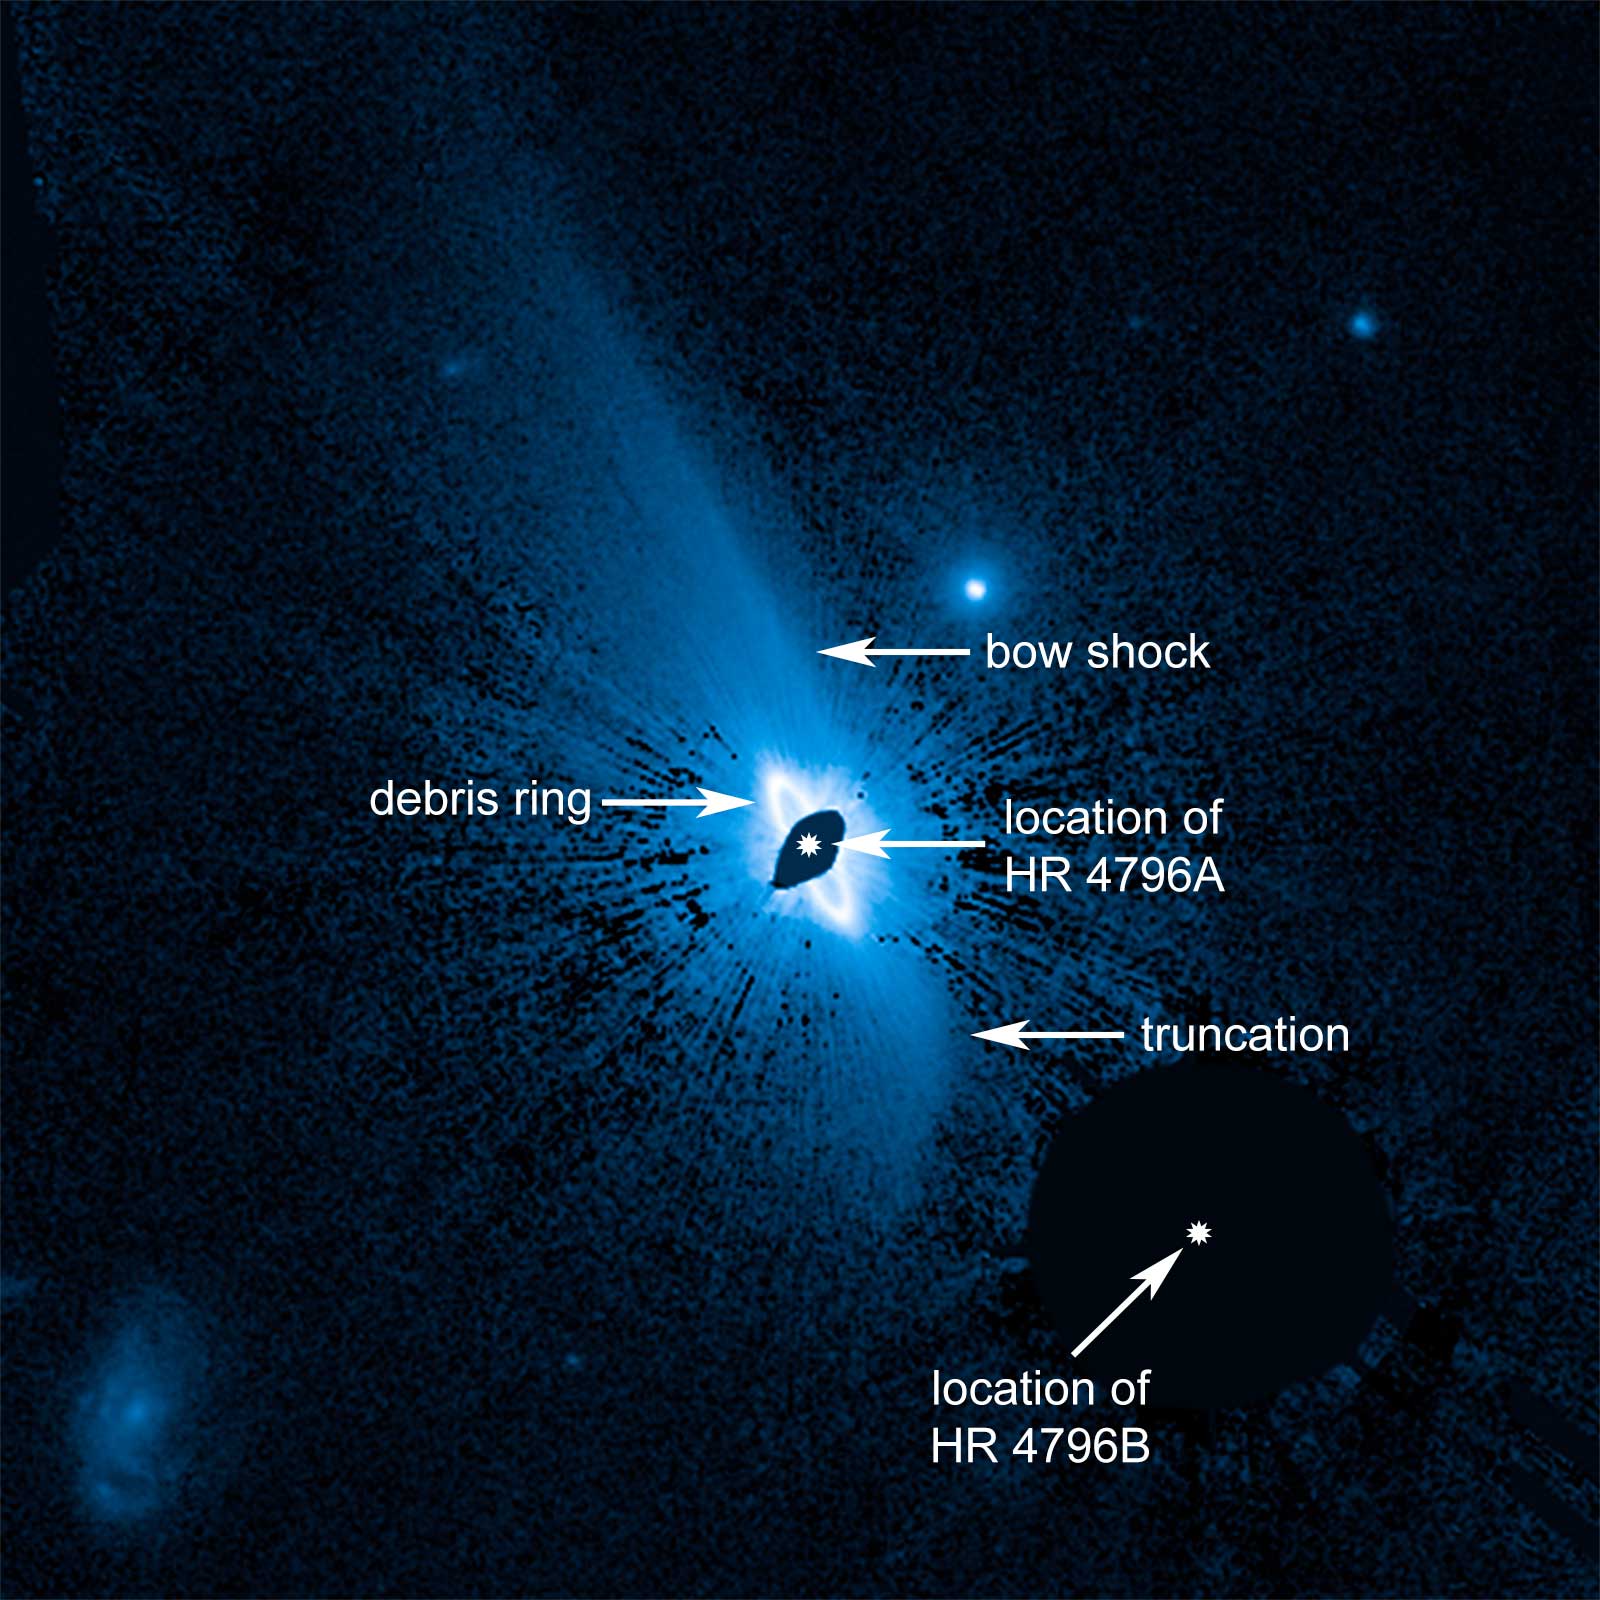 Webb targets include a debris ring and hidden planets within.